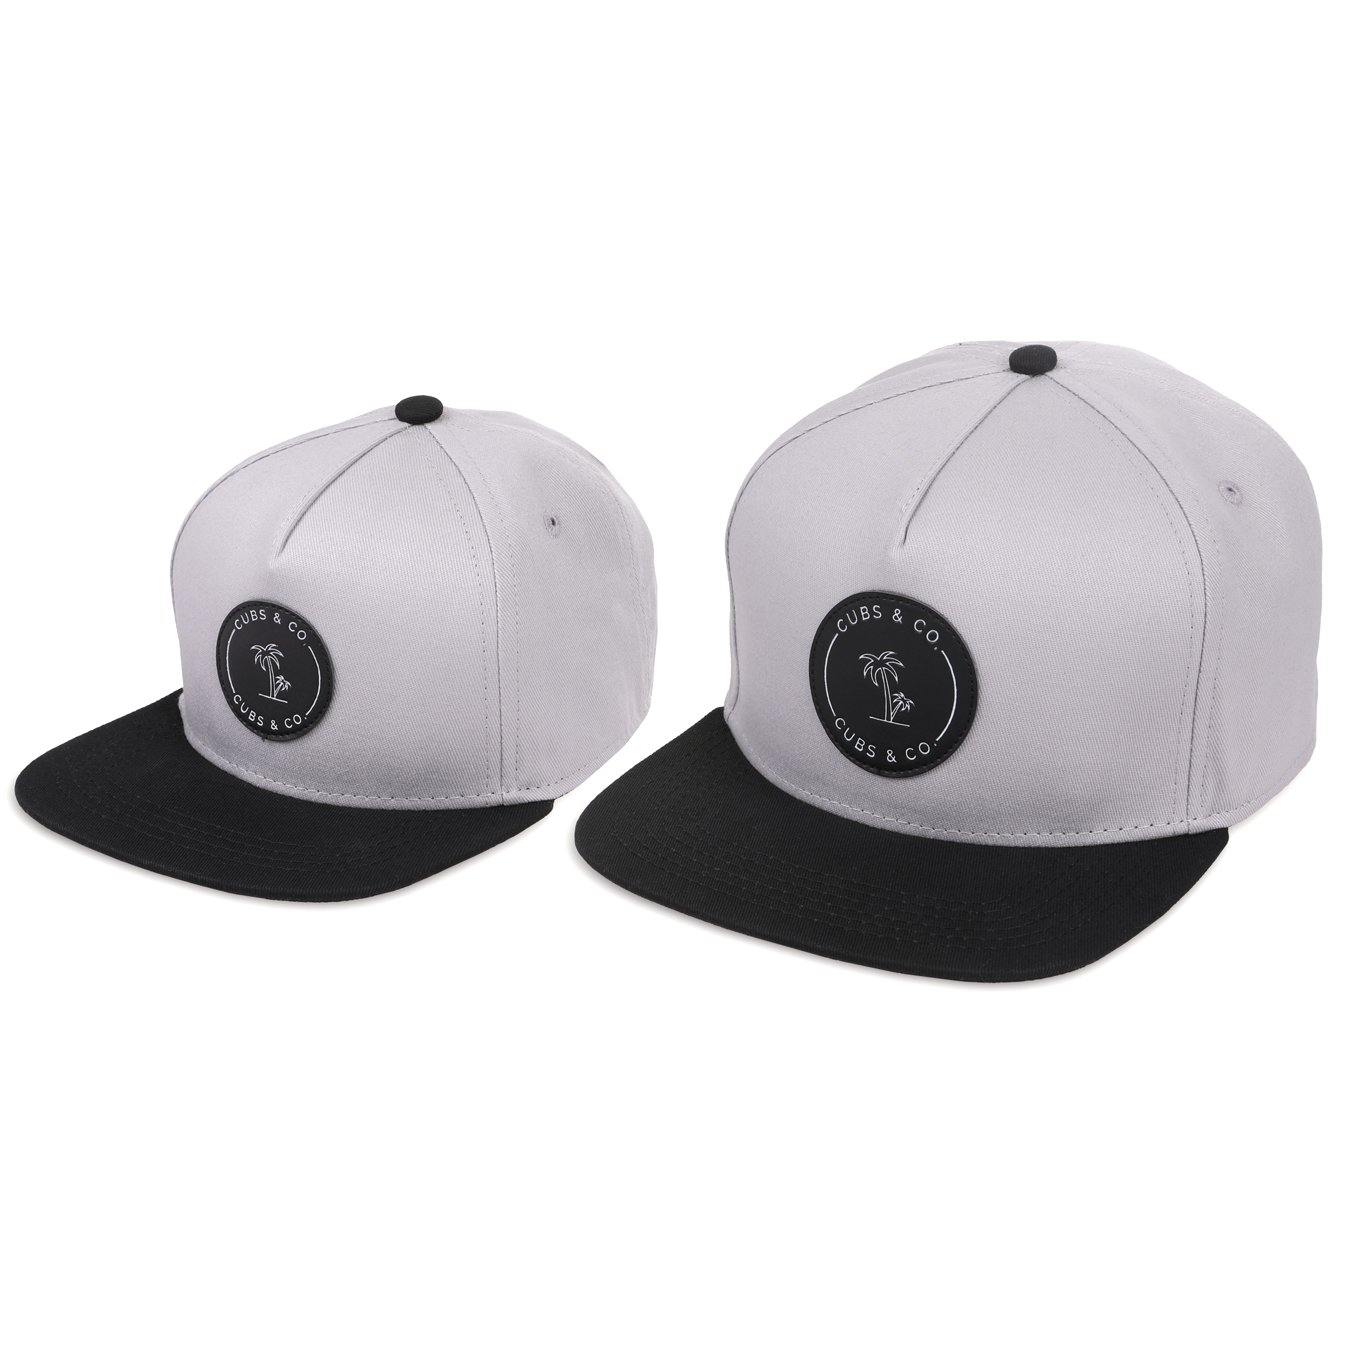 Matching Grey and black flatbrim snapback hat for babies, toddlers, kids and men. Cubs & Co. Australia